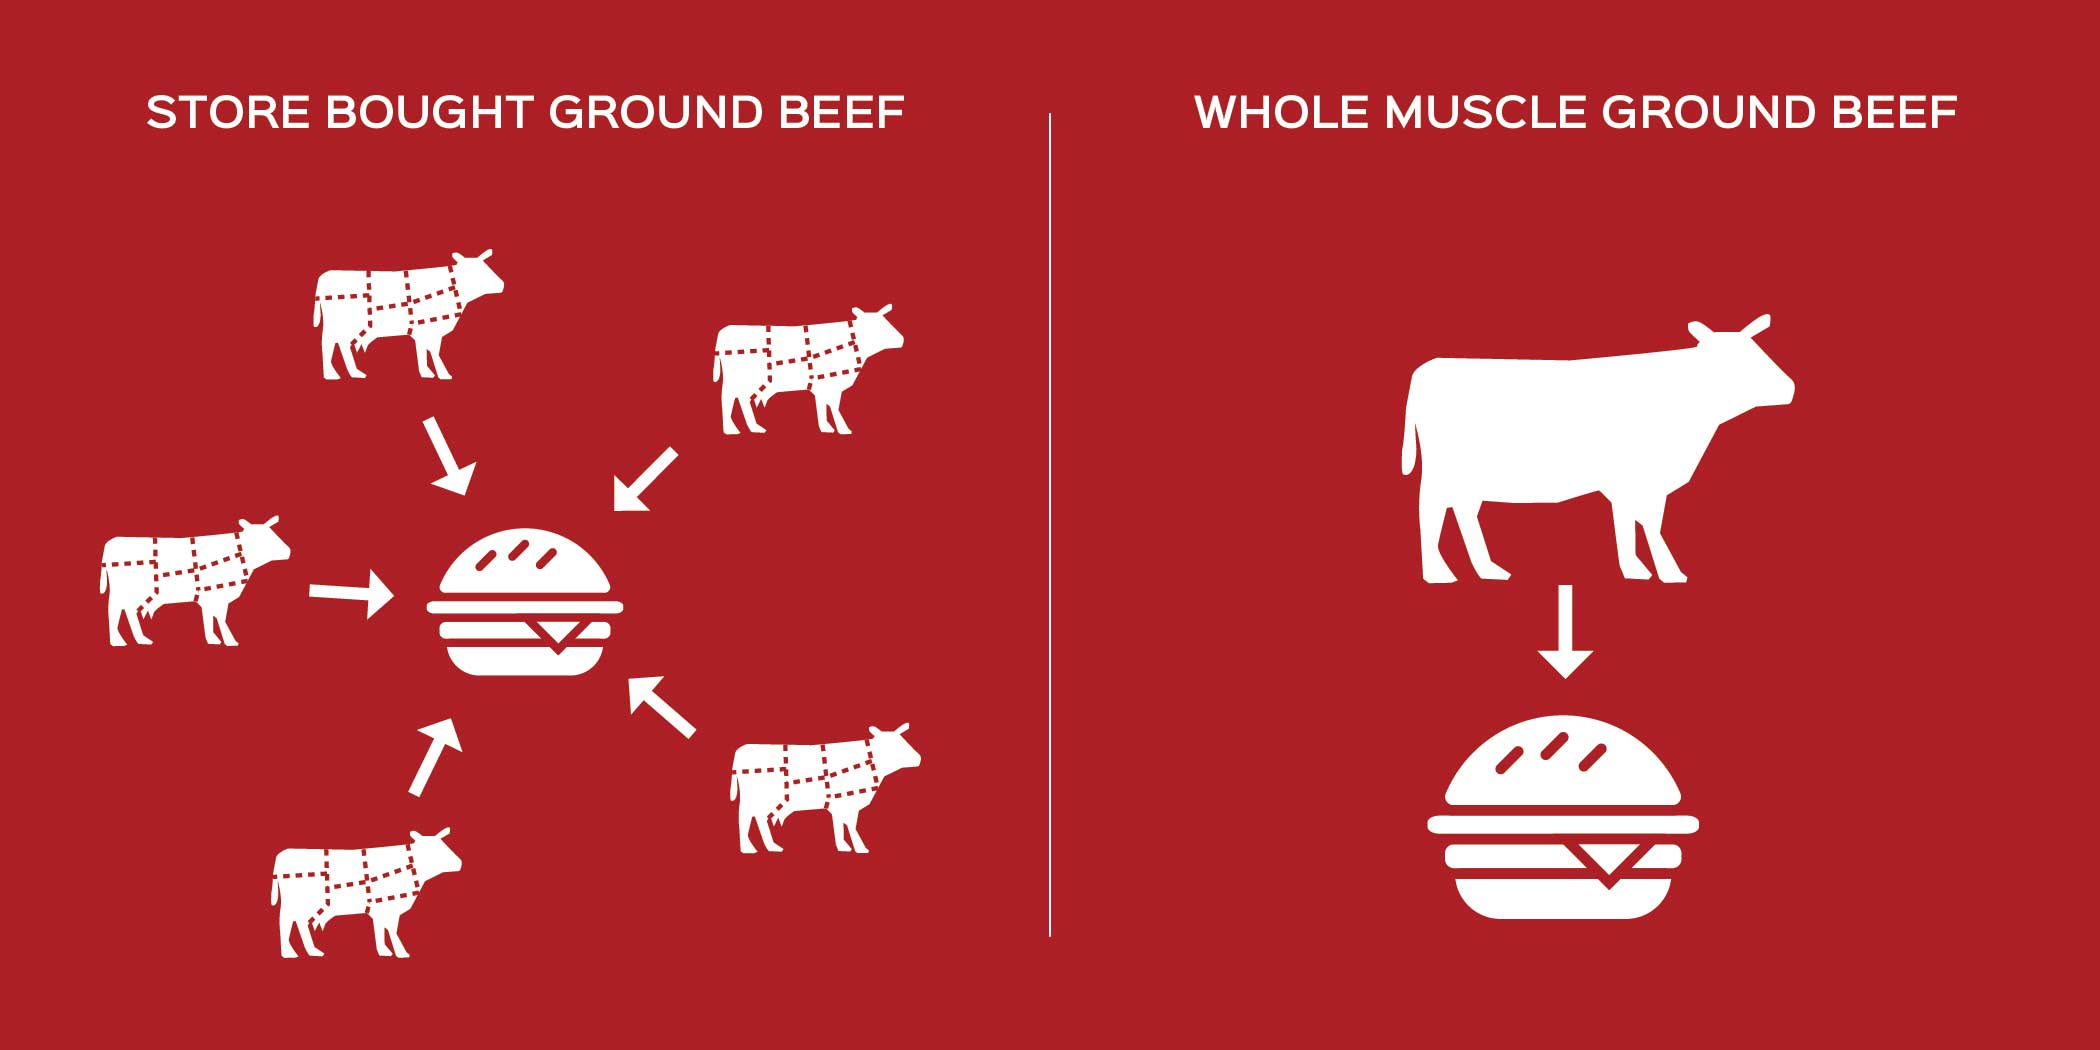 Make Better Burgers. All BetterFed Beef Whole Muscle Ground beef comes from one single male steer, born, raised, and harvested 100% in Midwest America